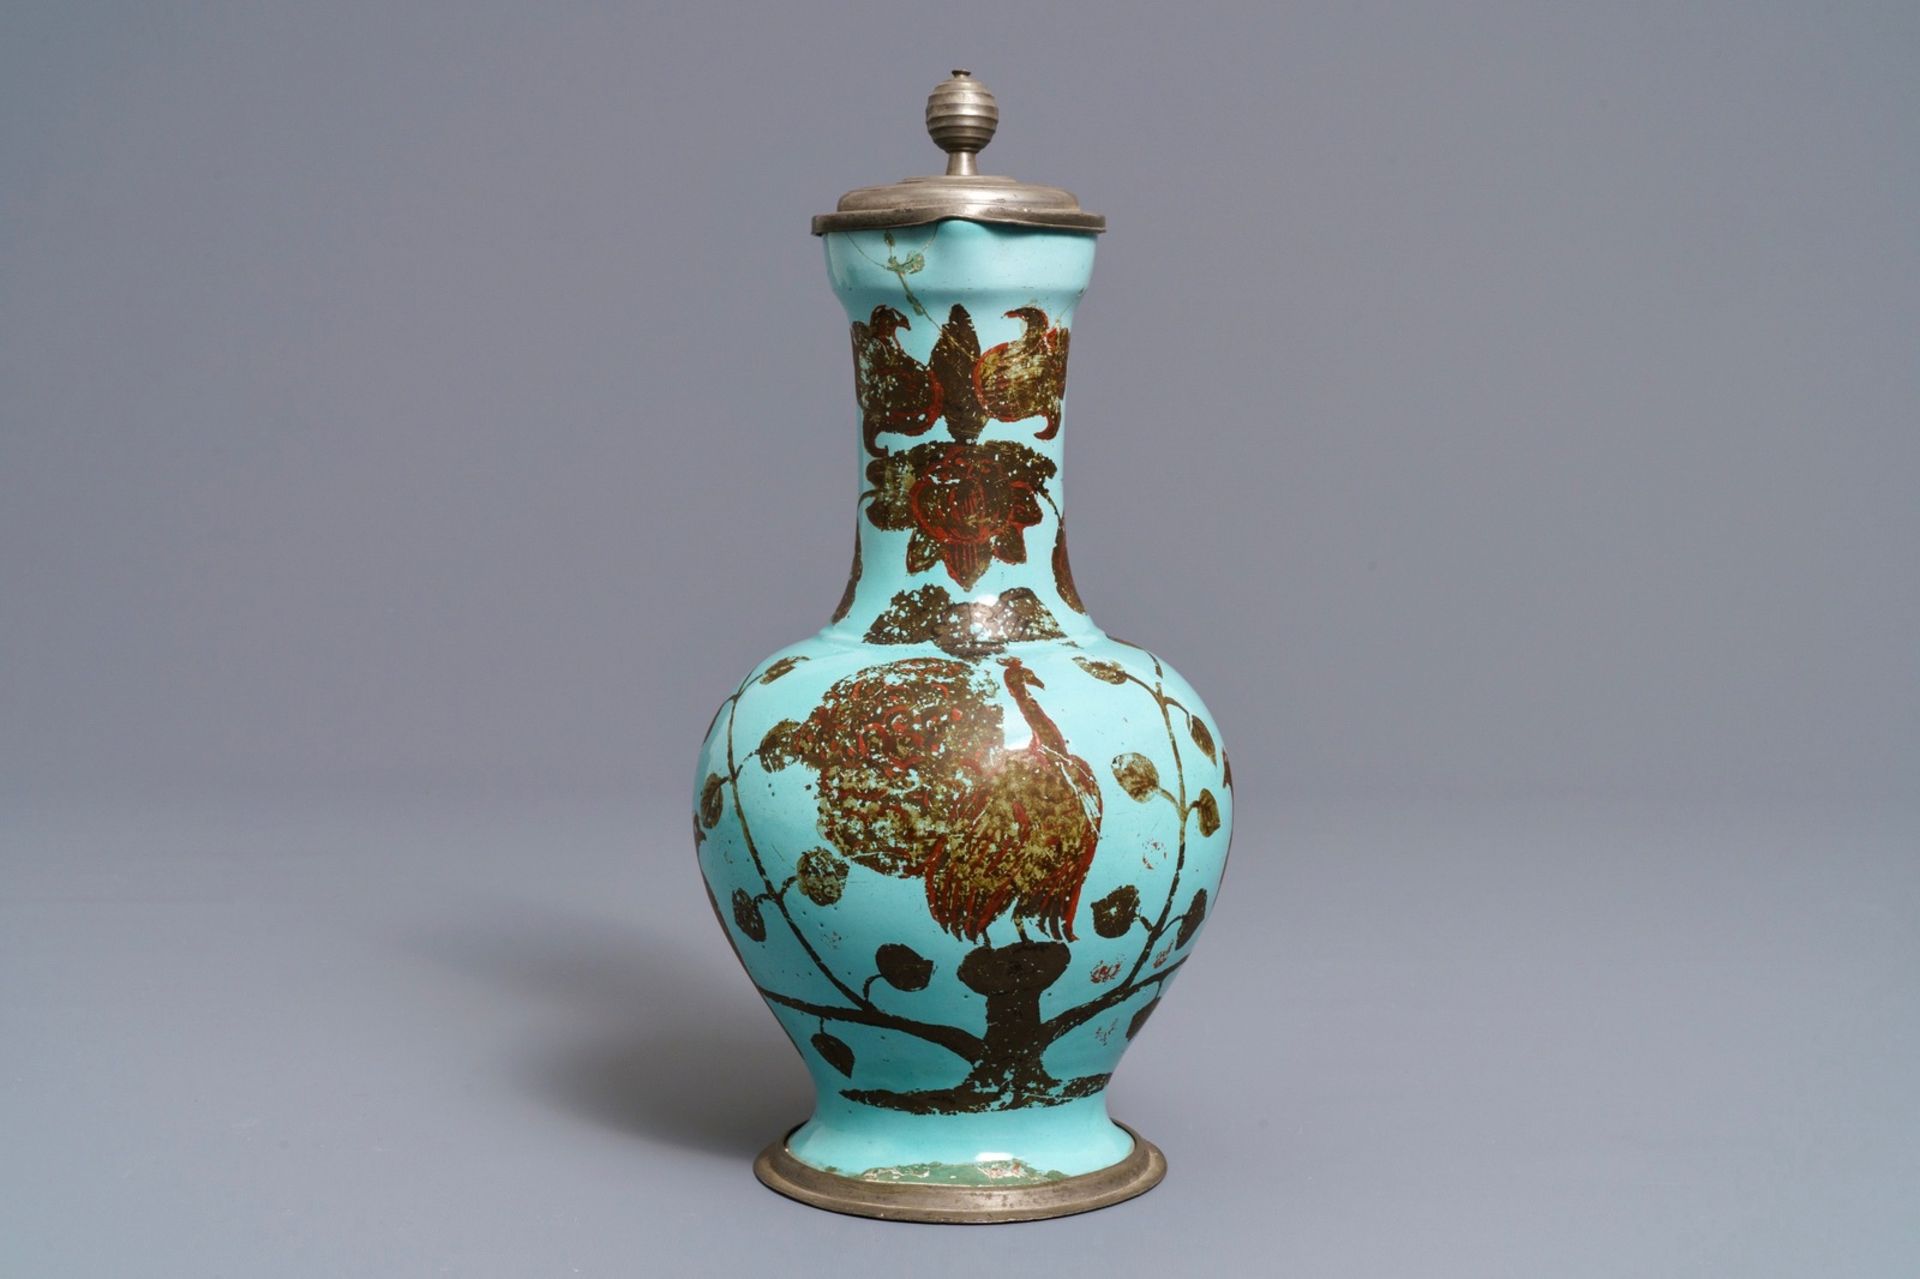 A German pewter-mounted turquoise ground ewer with birds among flowers, 17/18th C. - Image 3 of 8